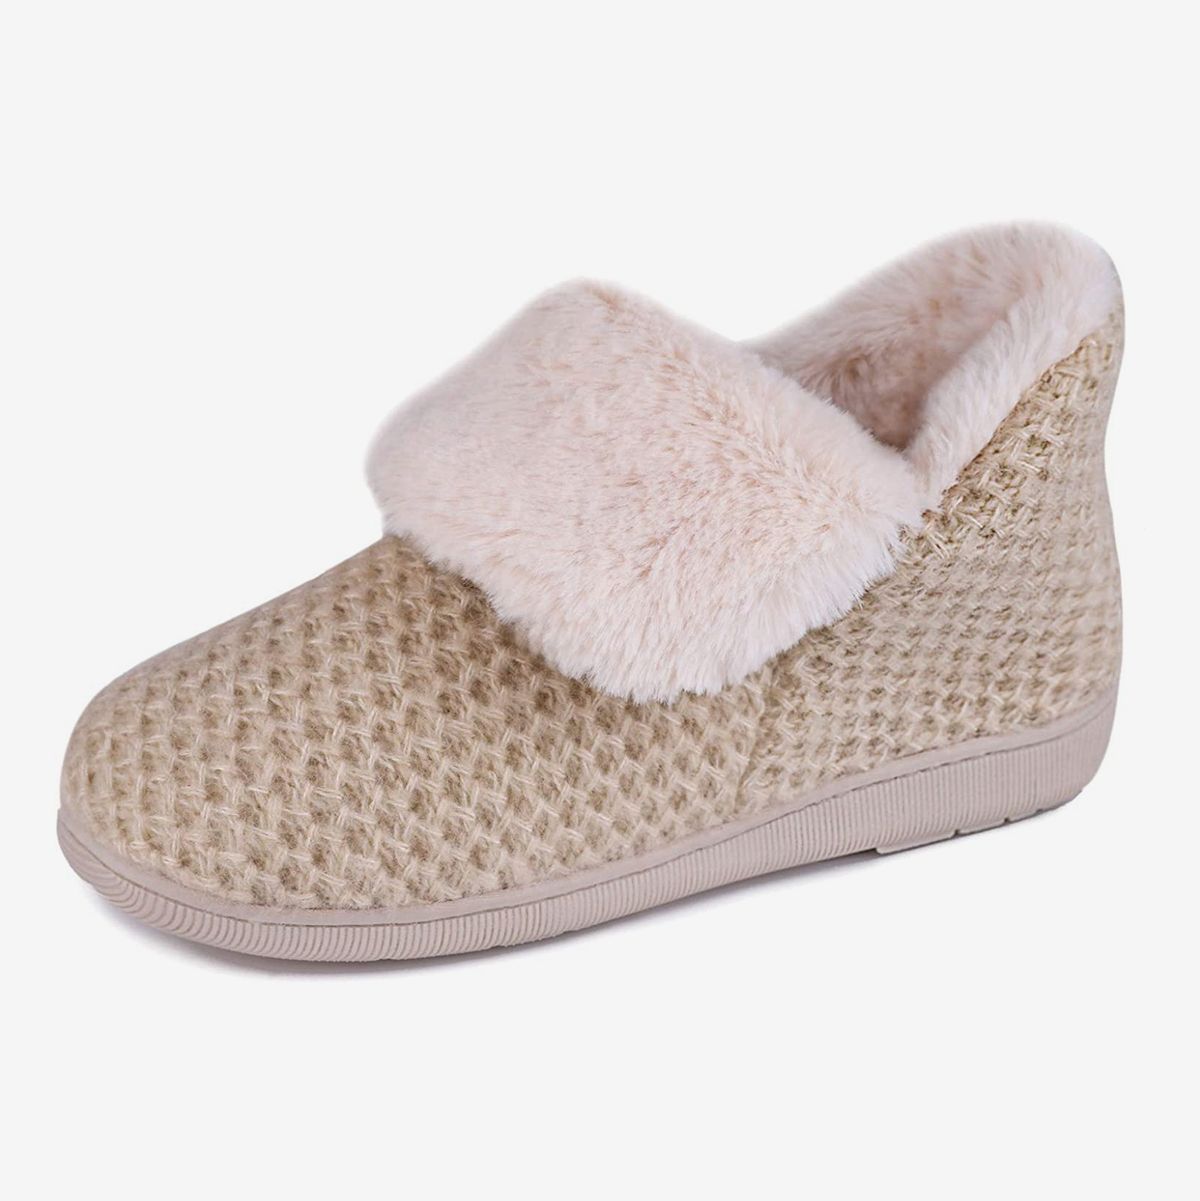 mule slippers with arch support